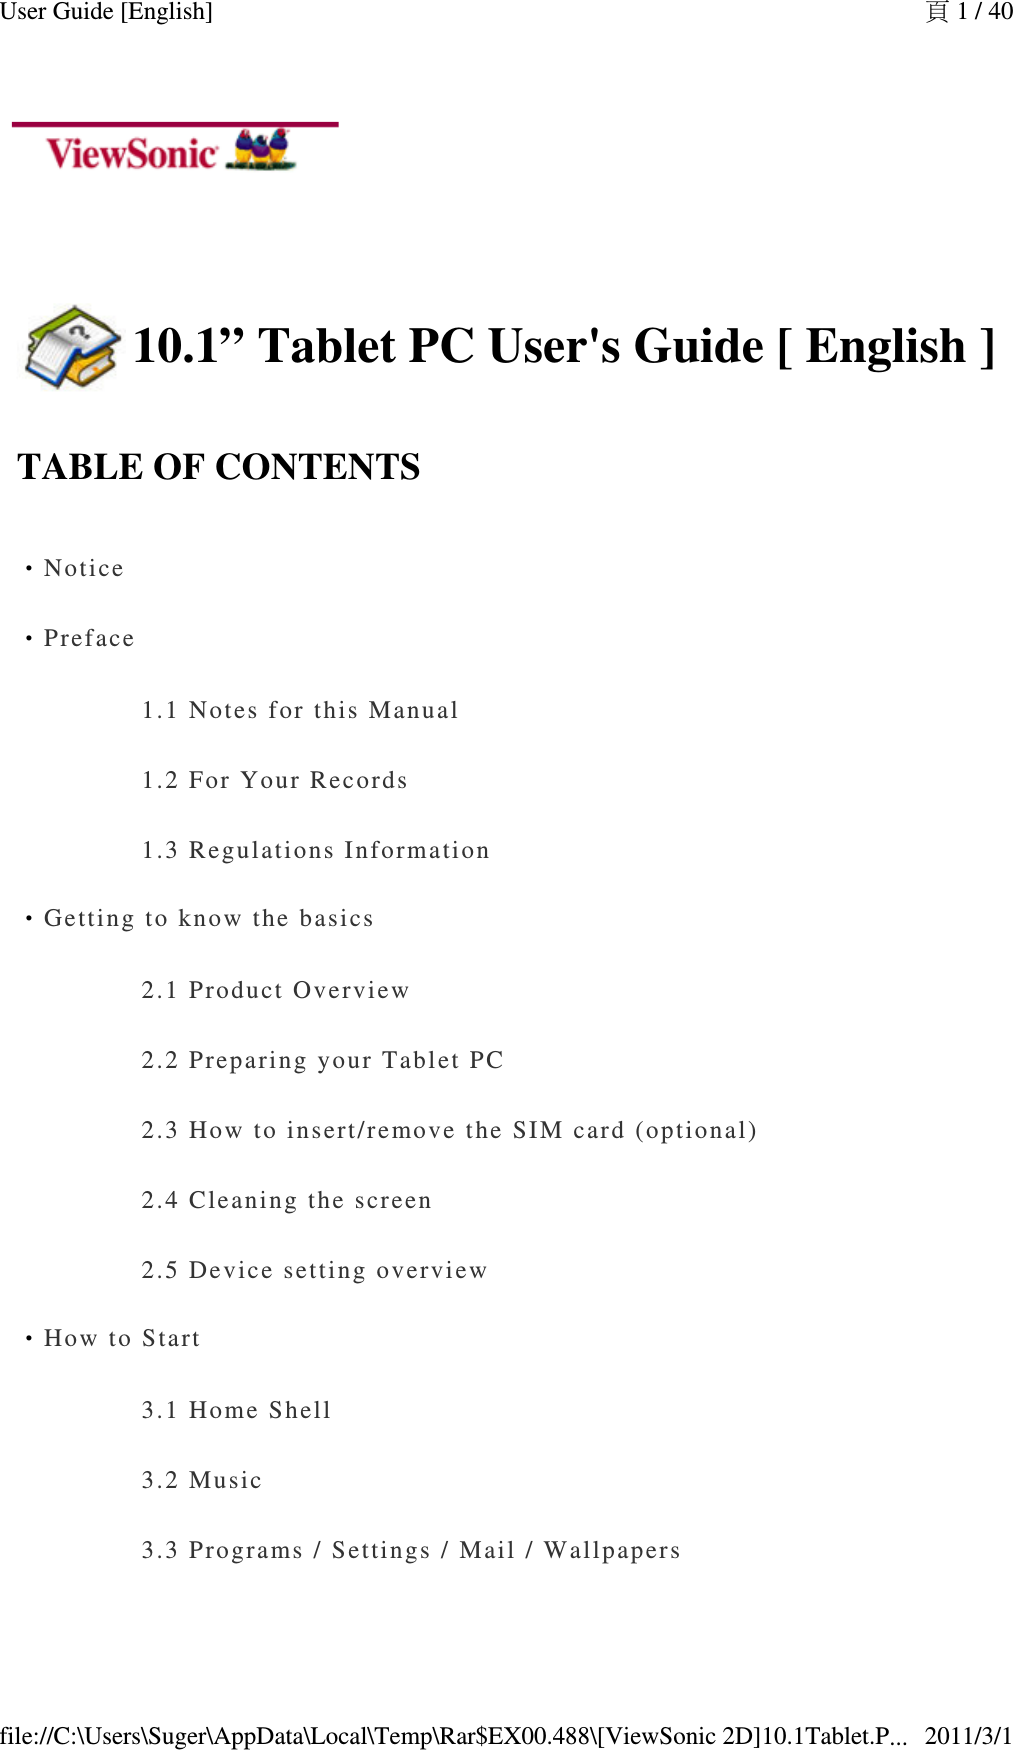    10.1” Tablet PC User&apos;s Guide [ English ]TABLE OF CONTENTS‧Notice‧Preface1.1 Notes f or this Manual1.2 For Your  R ecords1.3 Regulati ons Information‧Getting to   know the basics2.1 Product  O v erview2.2 Prepari ng your Tablet P C2.3 How to i nsert/remove  t he SIM card (o p tional)2.4 Cleaning  the screen2.5 Device s etting overview‧How to Start3.1 Home Sh el l3.2 Music3.3 Progra ms / Settings /  Mail / Wallpaper s頁 1 / 40User Guide [English]2011/3/1file://C:\Users\Suger\AppData\Local\Temp\Rar$EX00.488\[ViewSonic 2D]10.1Tablet.P...